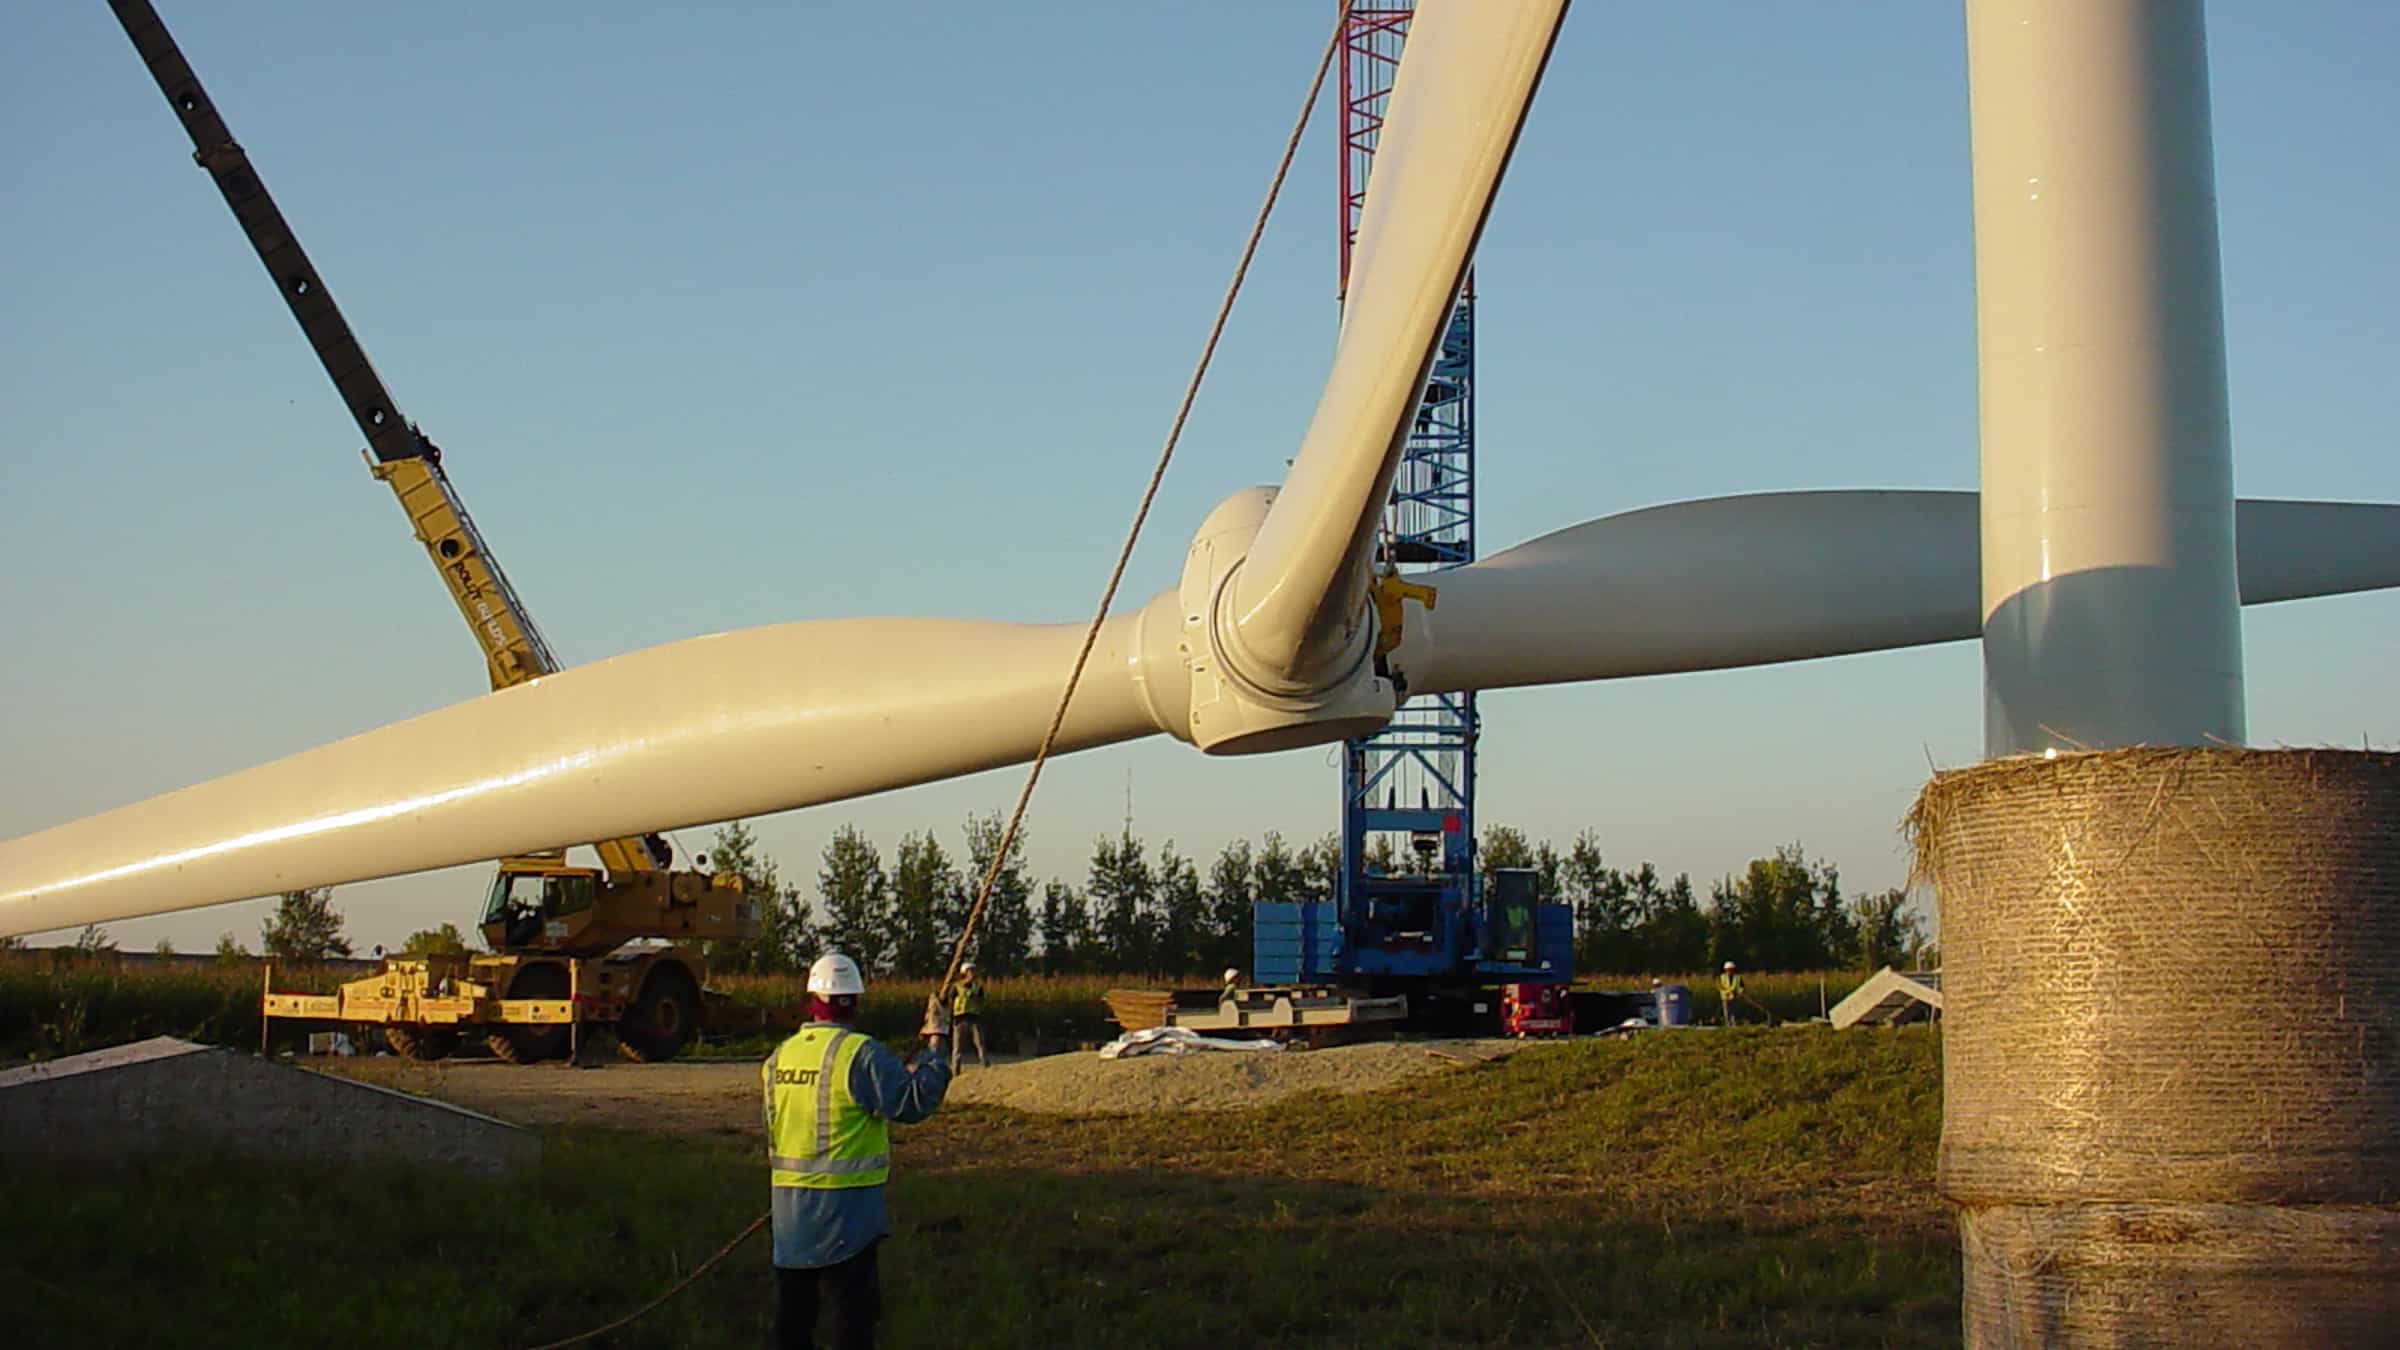 St. Olaf College - Wind Turbine Erection of Blades by Two Boldt Cranes. Boldt Employee in Foreground Guiding Lift